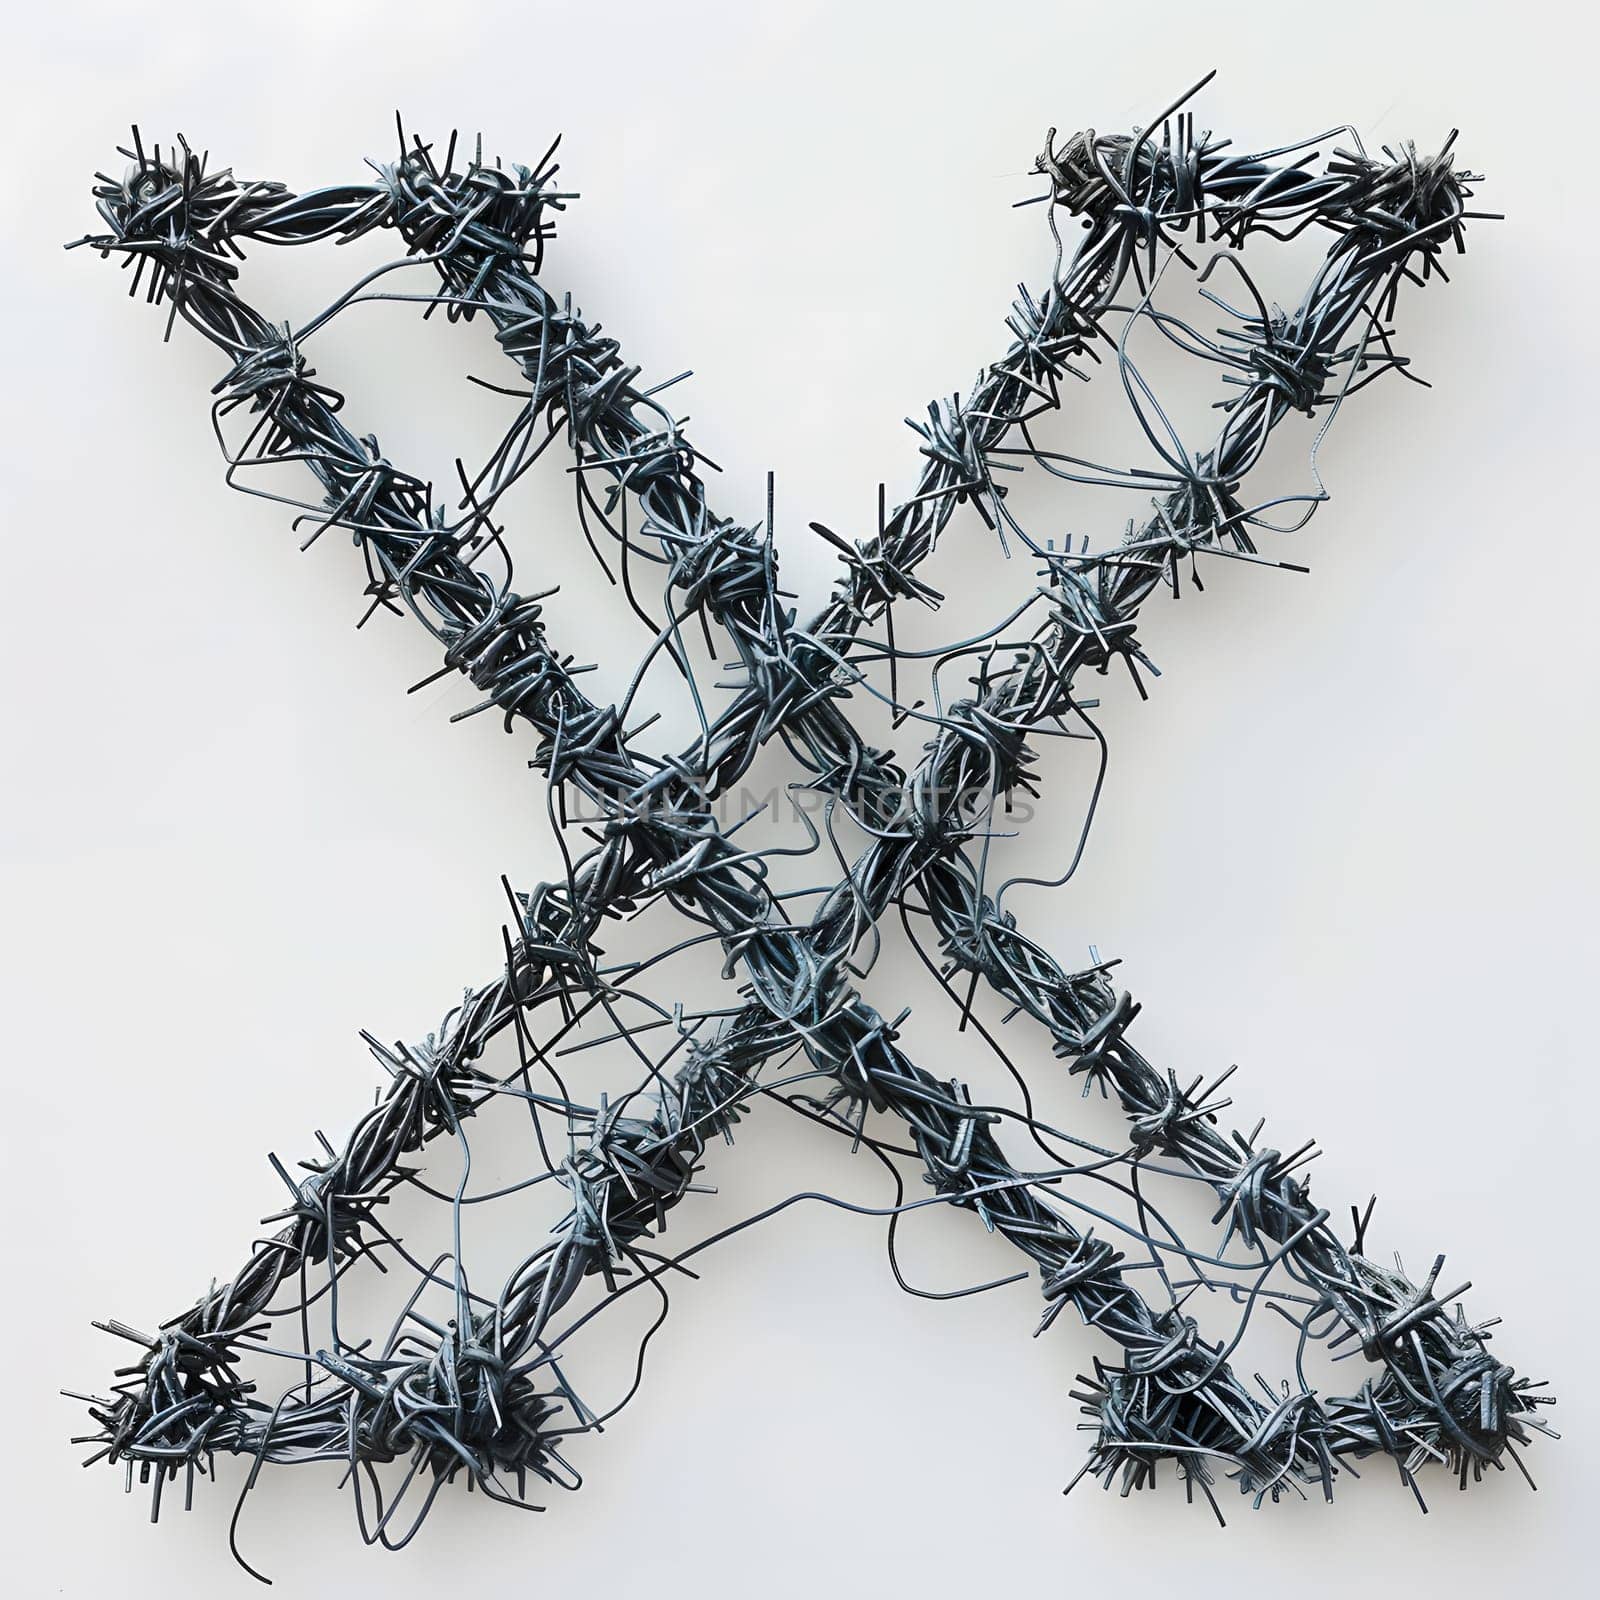 The symbol of letter x is represented as a cross made out of barbed wire, creating an intricate pattern resembling a twisted twig in an electric blue font, symbolizing strength and resilience in art